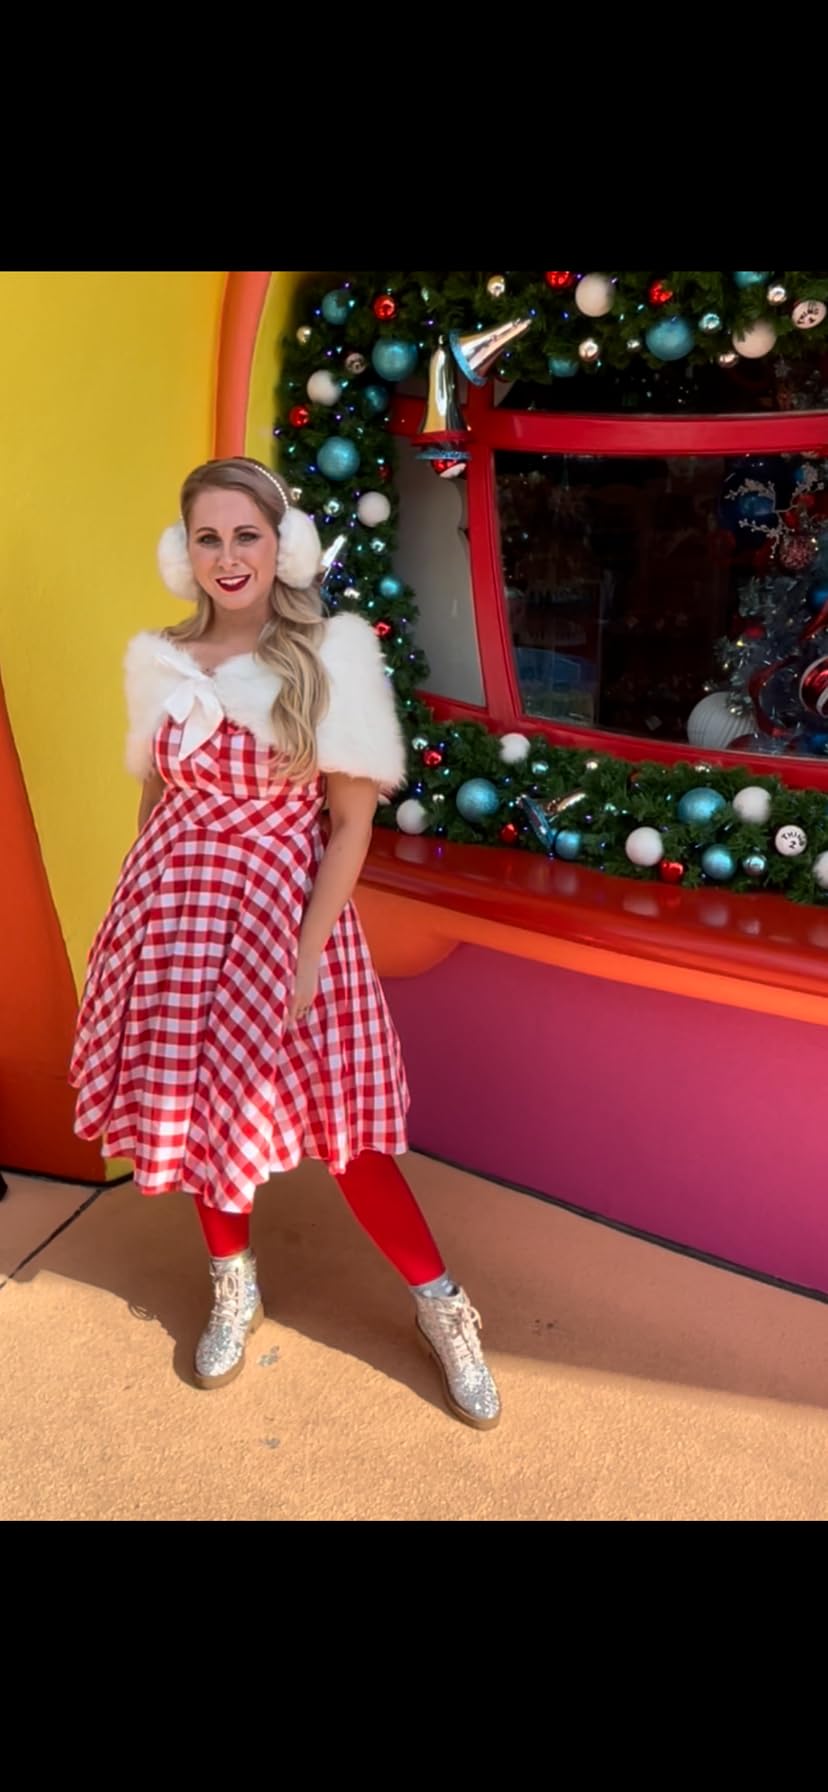 The perfect holiday outfit for Grinchmas at Universal Studios Orlando ❤️🎄